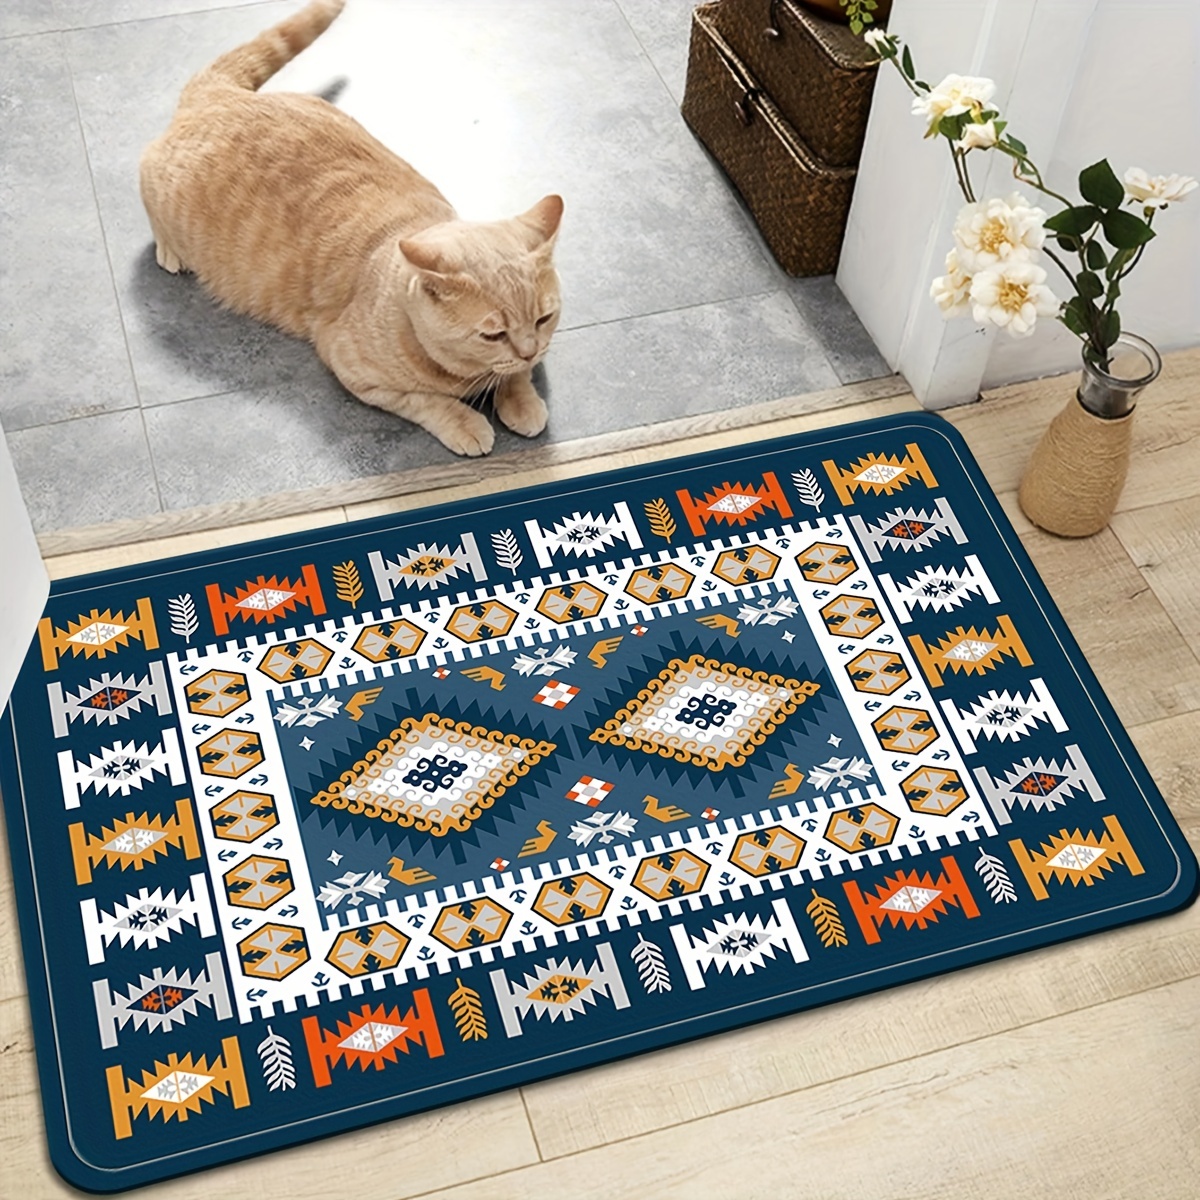 Significance of kitchen rugs  Tuscany kitchen, Kitchen area rugs,  Mediterranean home decor